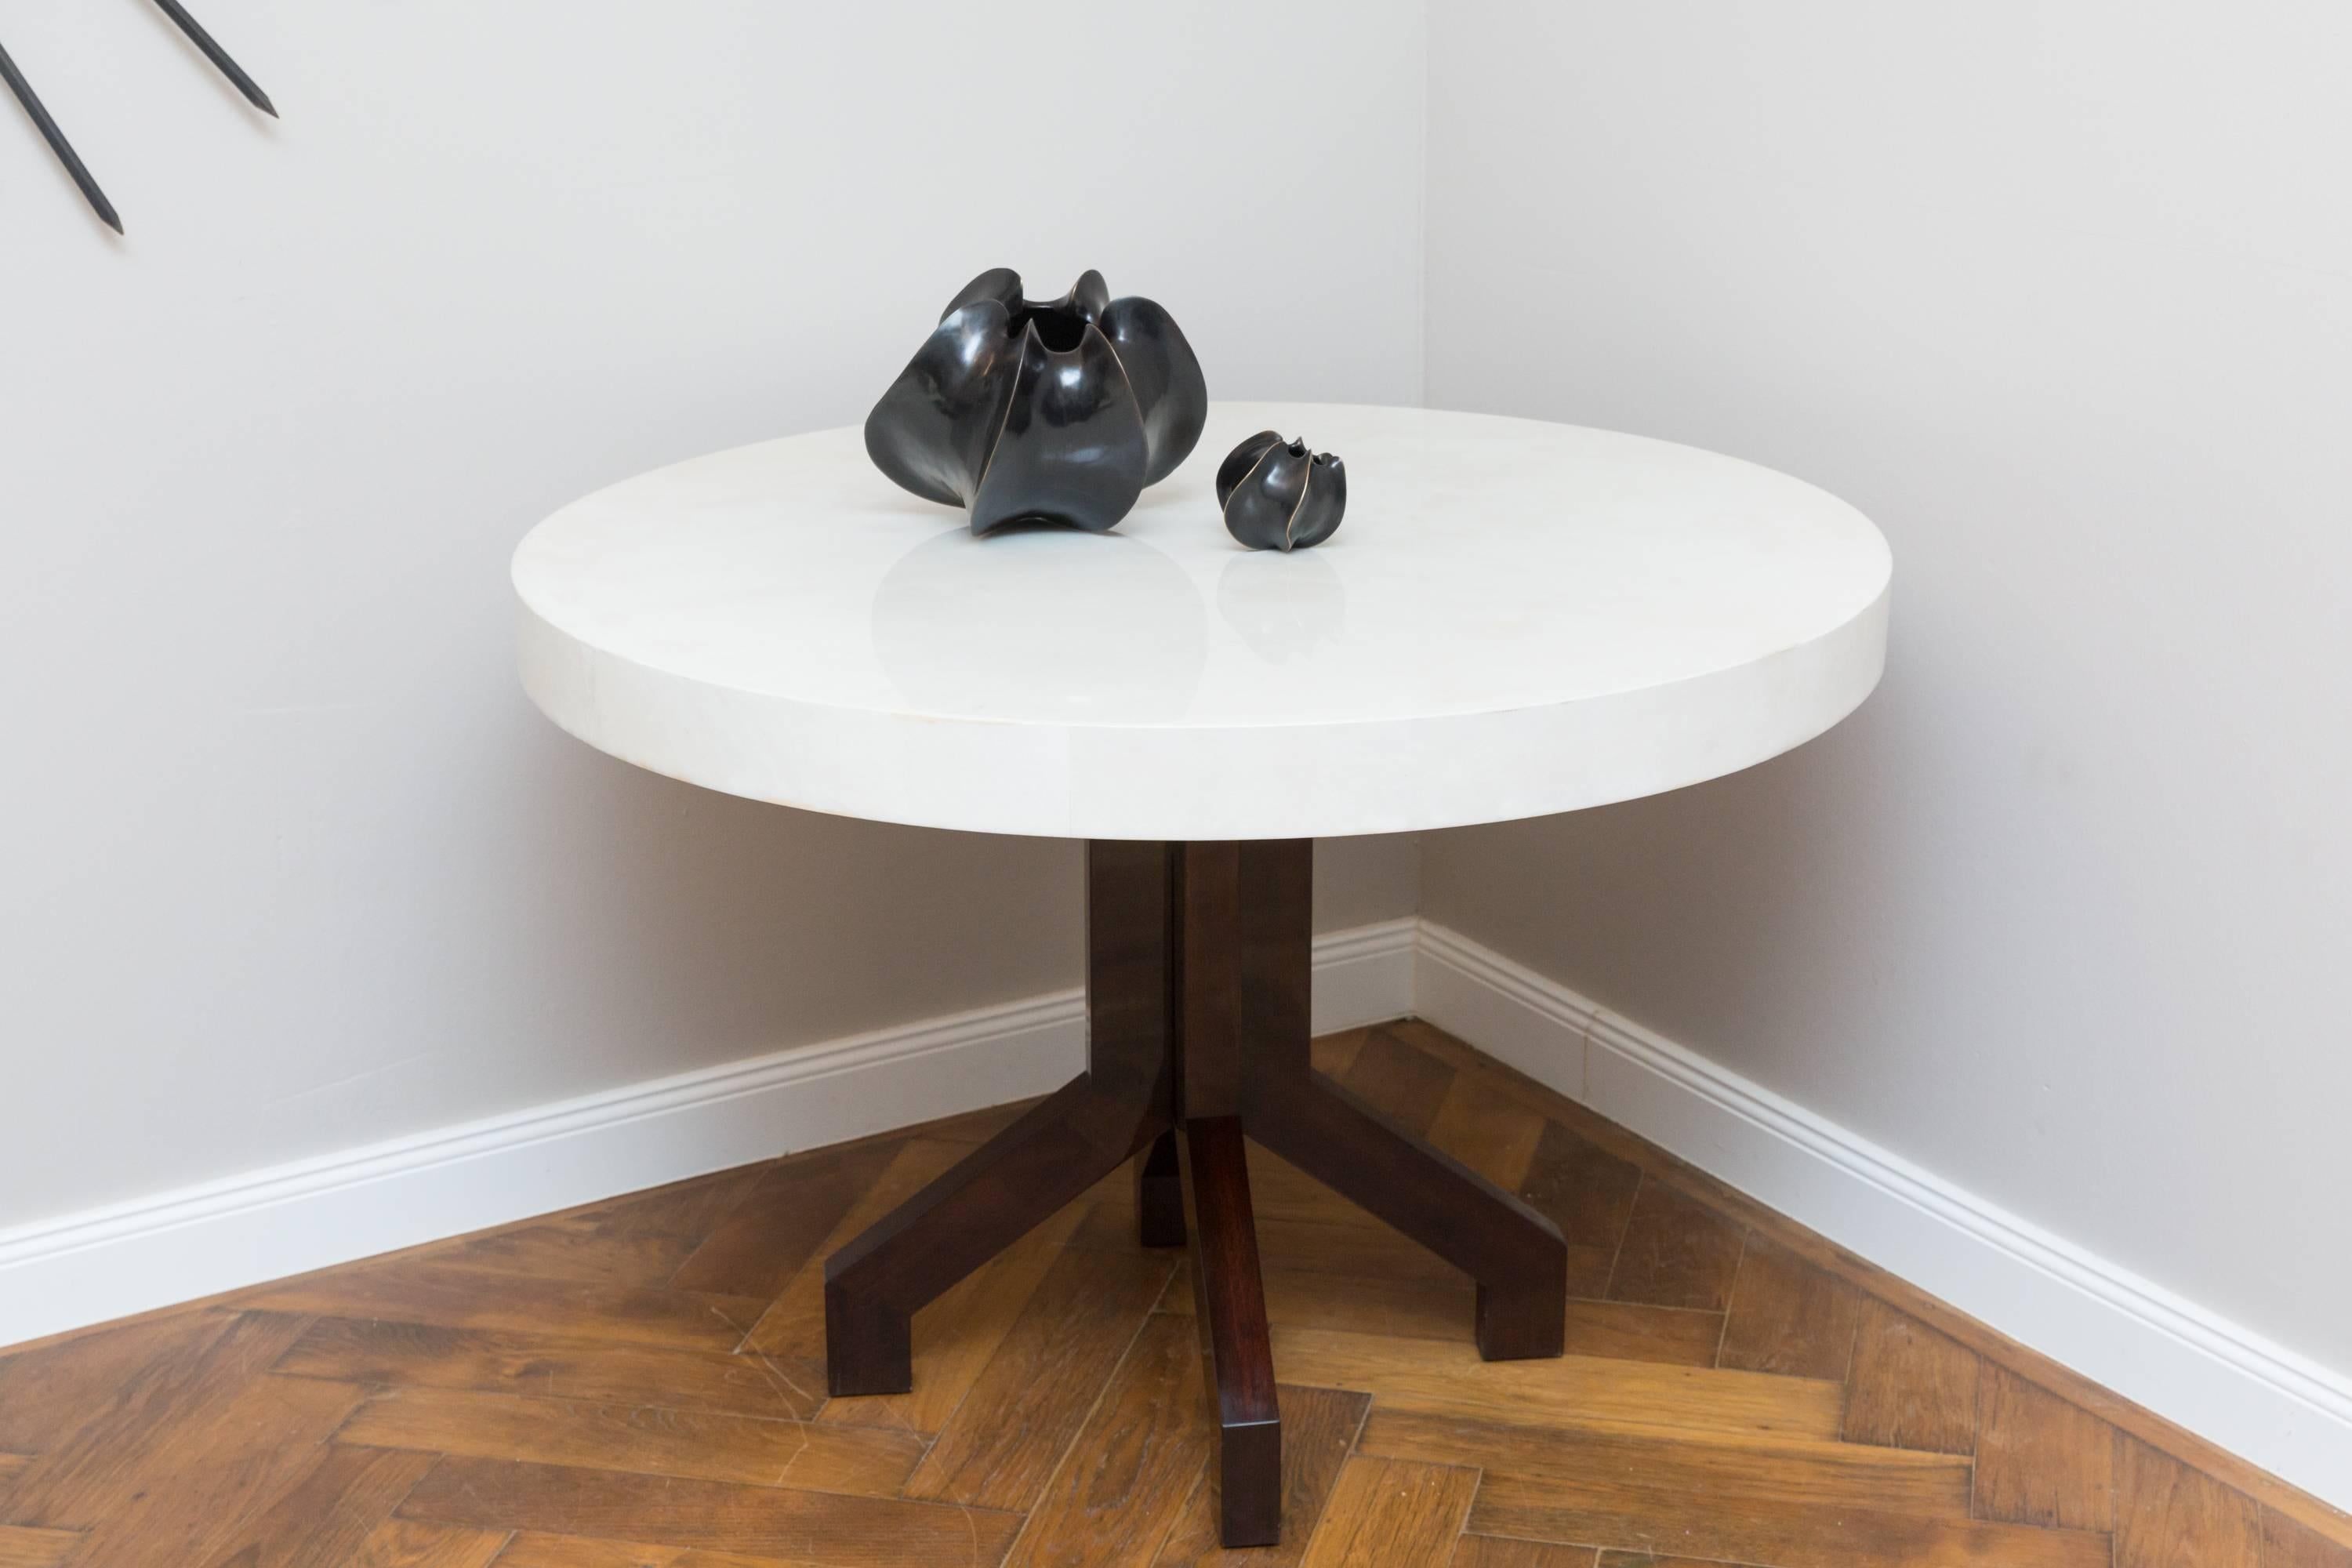 Amazing dining table by Aldo Tura, Italy, circa 1960, lacquered bright goatskin, dark rosewood legs. Measure: Diameter 110 cm, height 75 cm, plate thickness 8 cm, legs diameter 64 x 64 cm.
Perfect condition, elaborately restored.